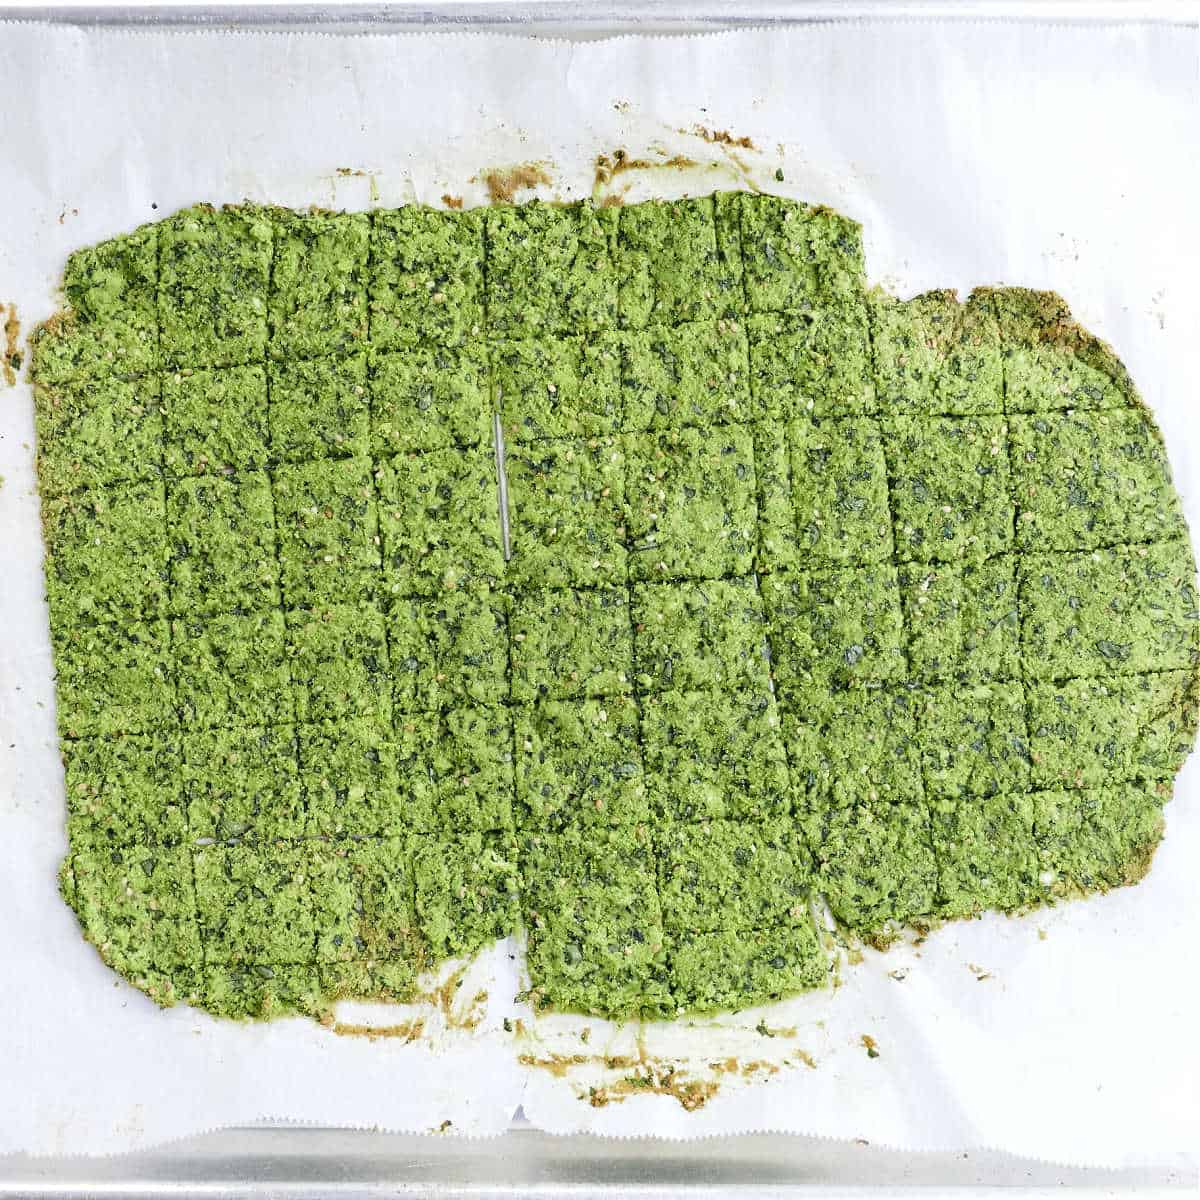 Spinach crackers after being baked on parchment paper.